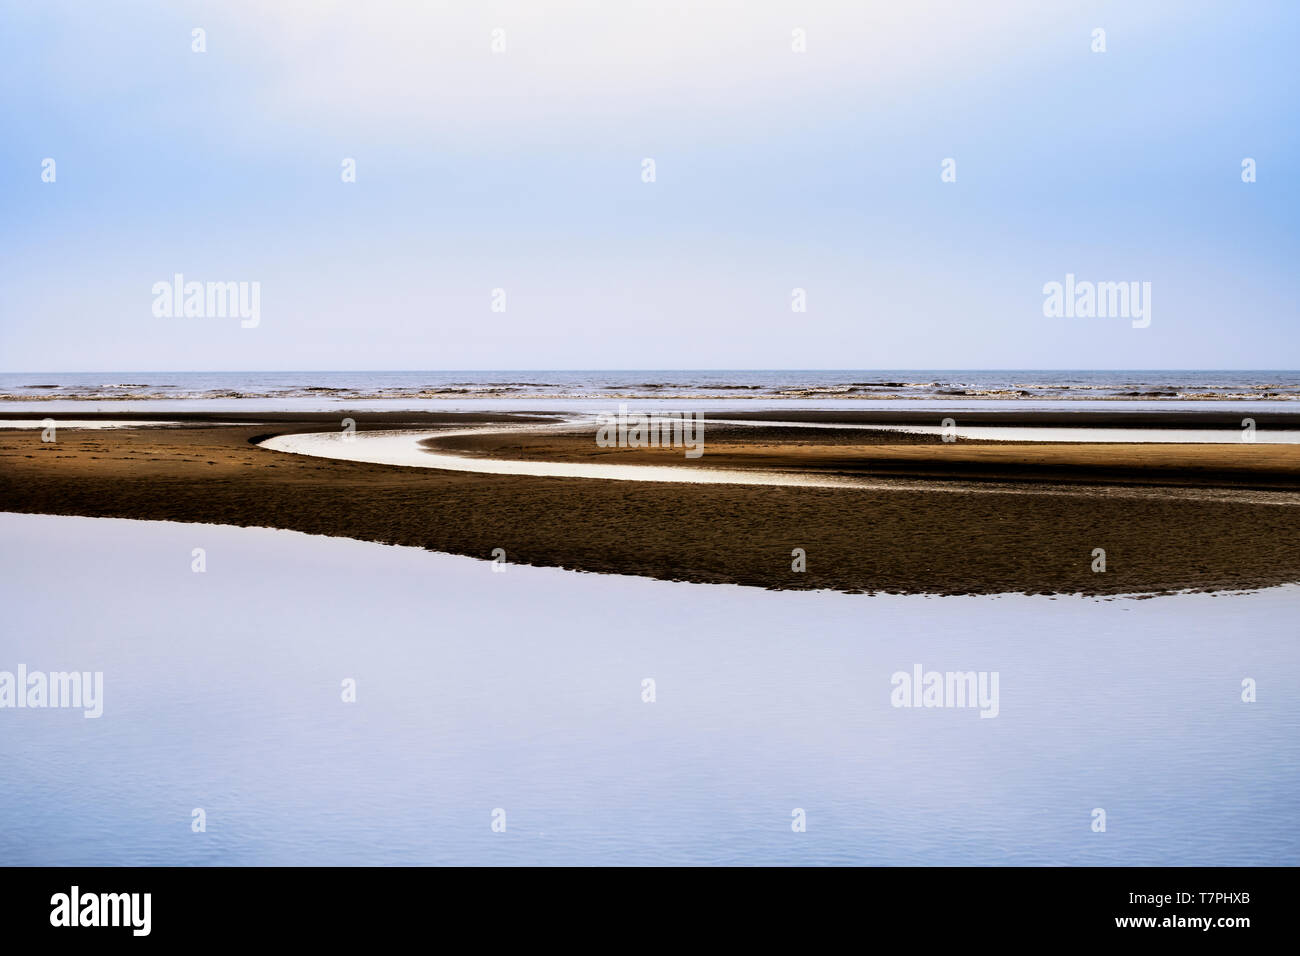 Sea view with distinct graphical forms, Belgium Stock Photo